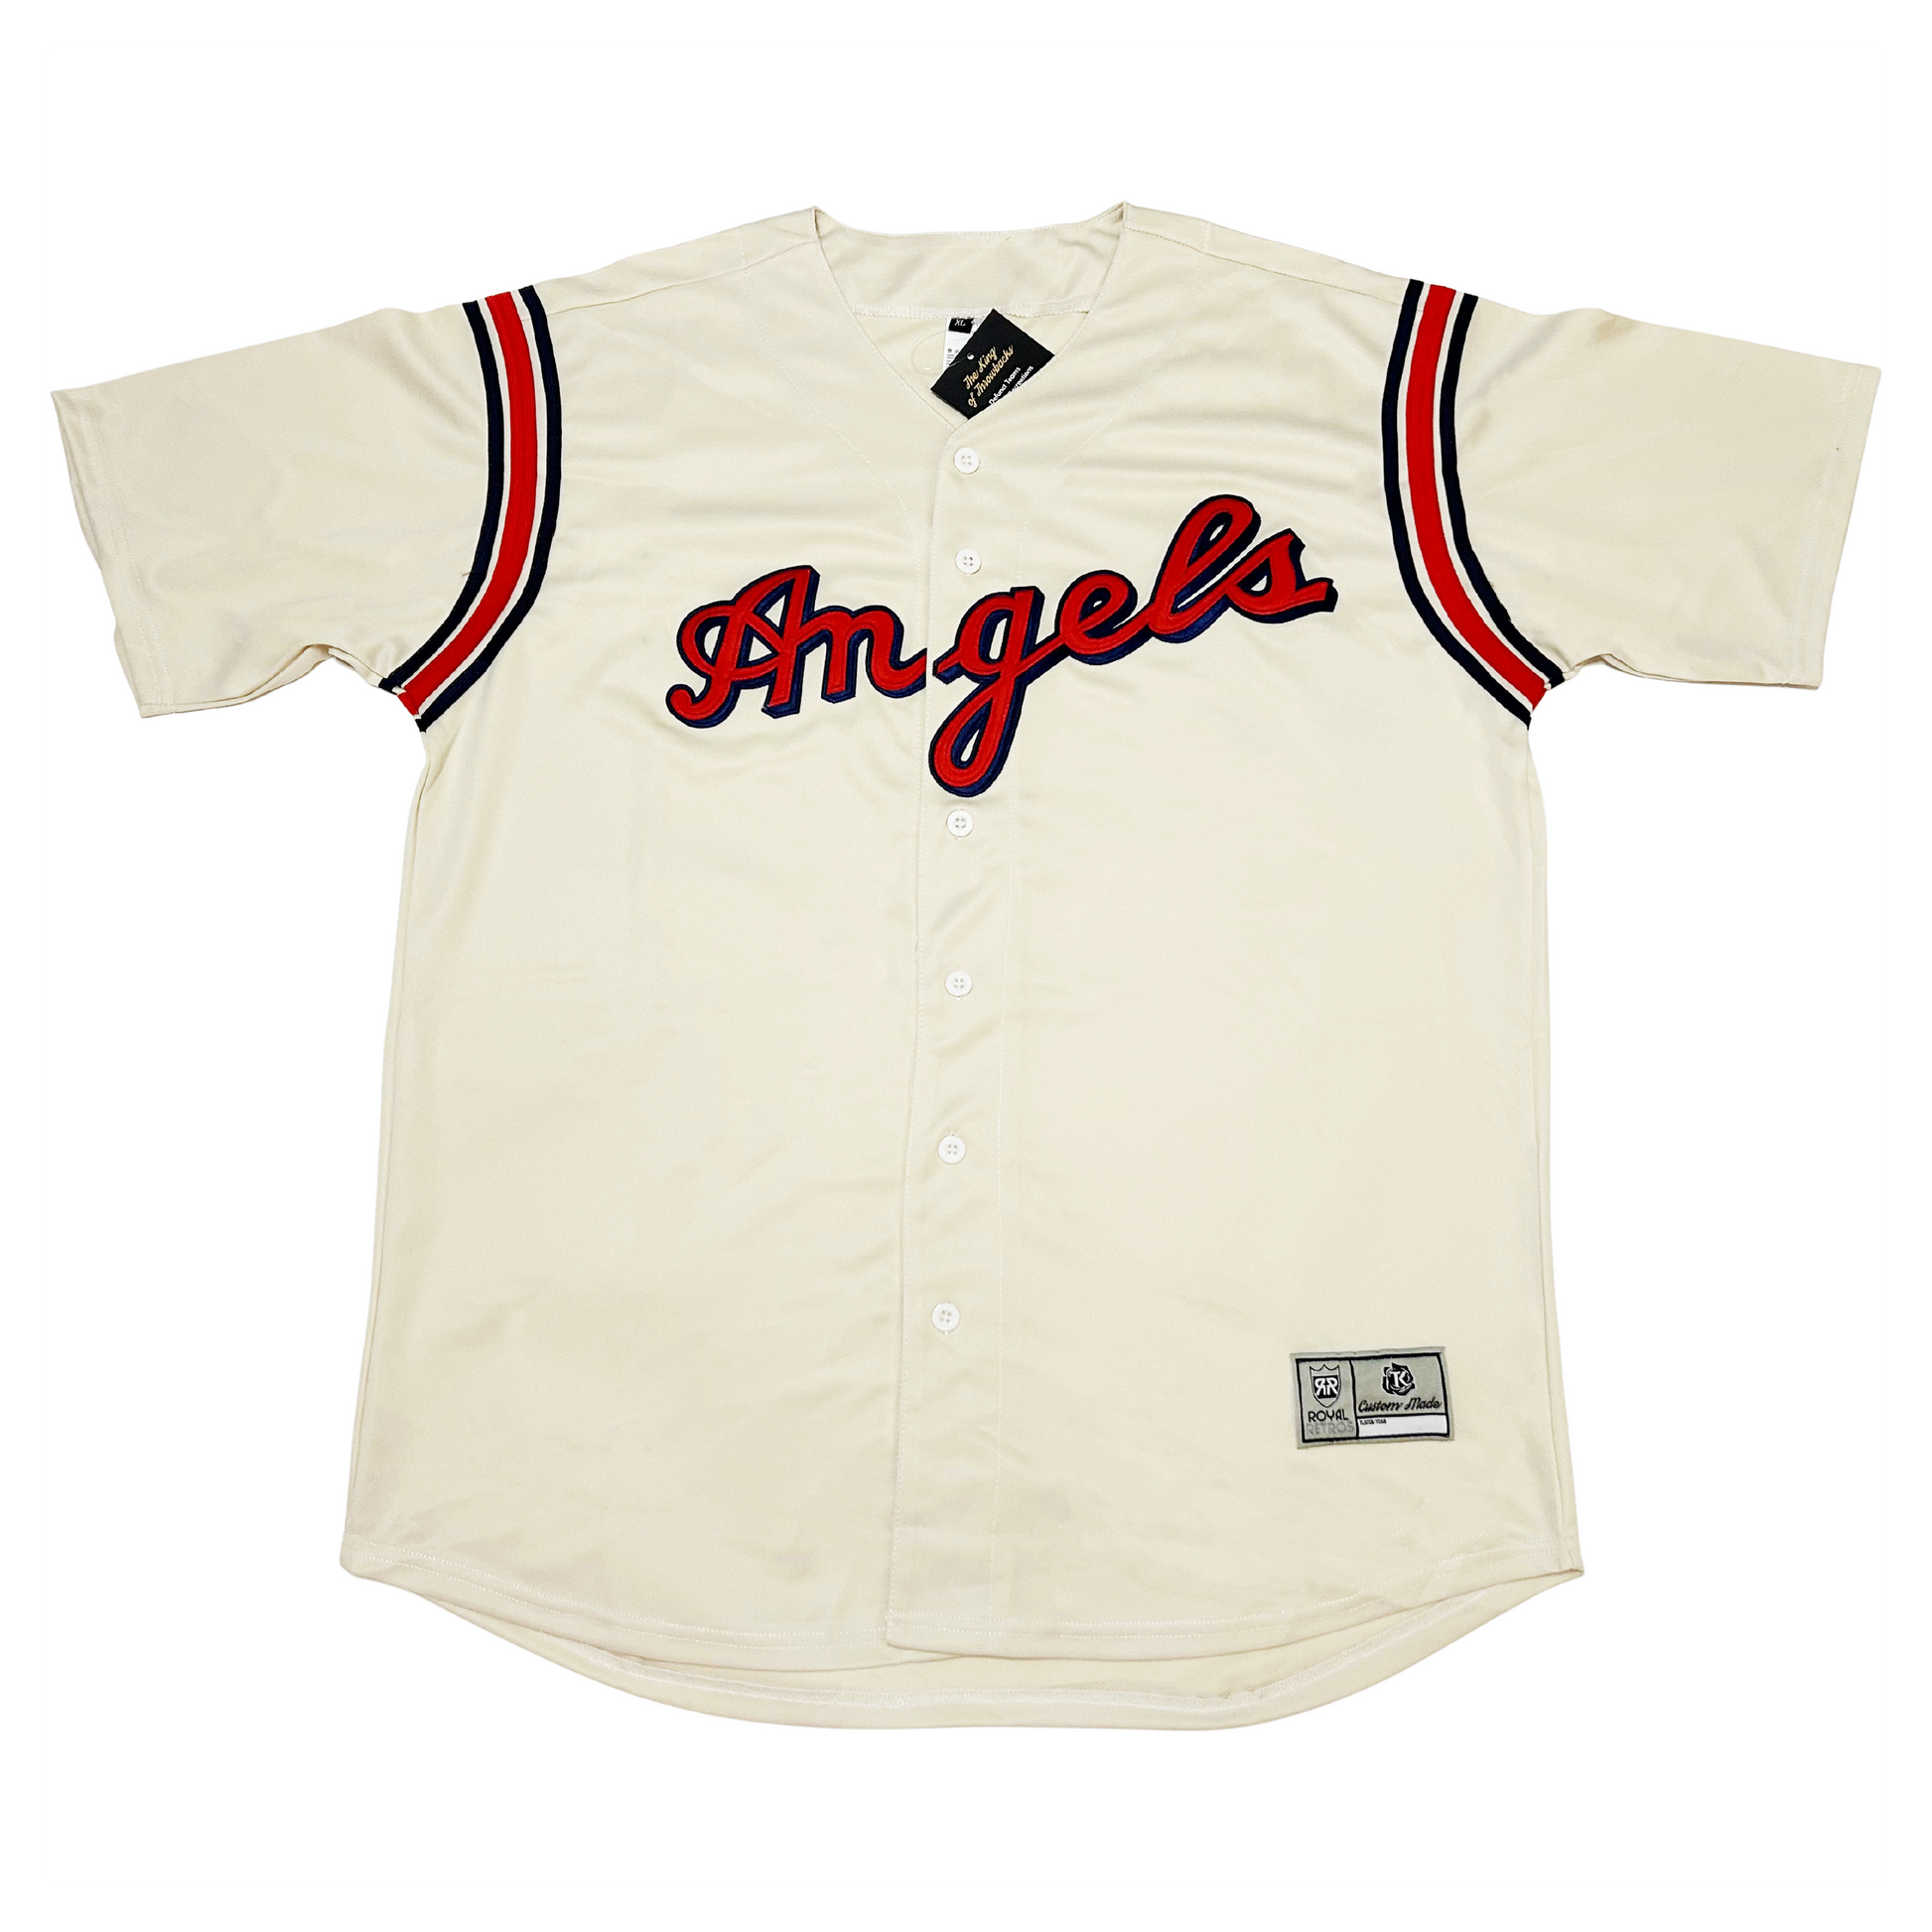 Authentic Los Angeles Angels Jerseys, Throwback Los Angeles Angels